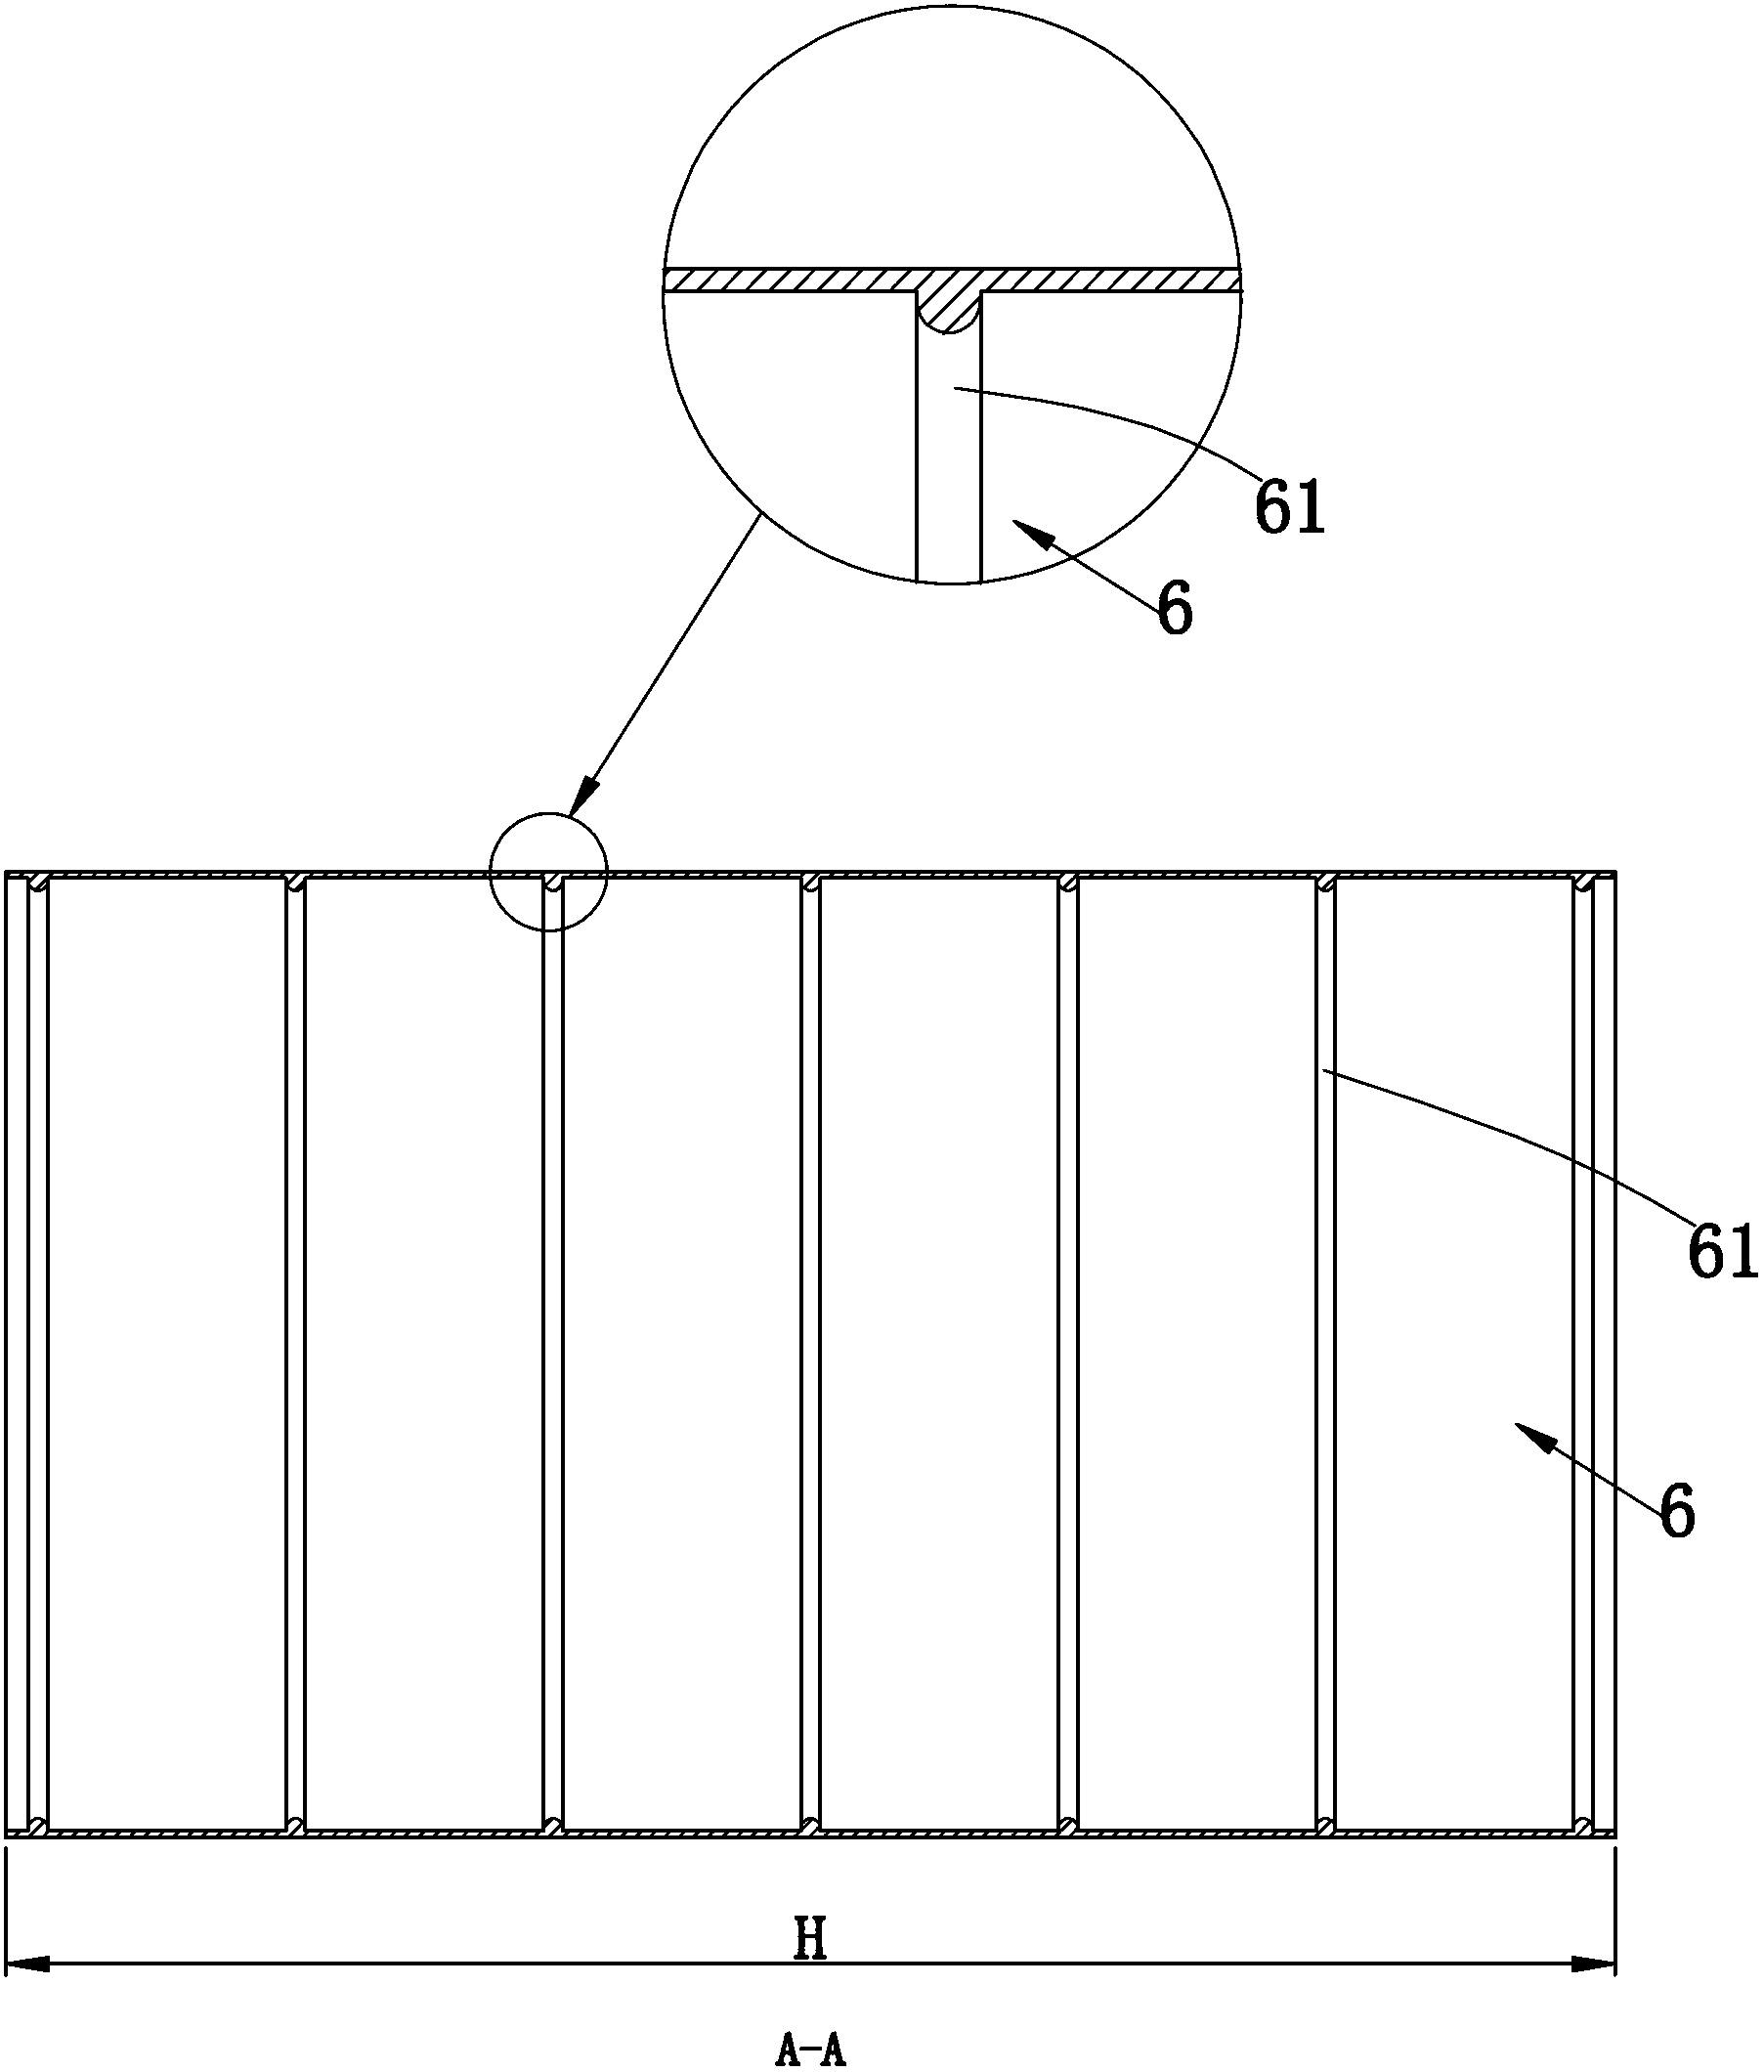 Large-sized glass fiber reinforced plastic shaping mold, as well as manufacturing equipment and manufacturing method thereof